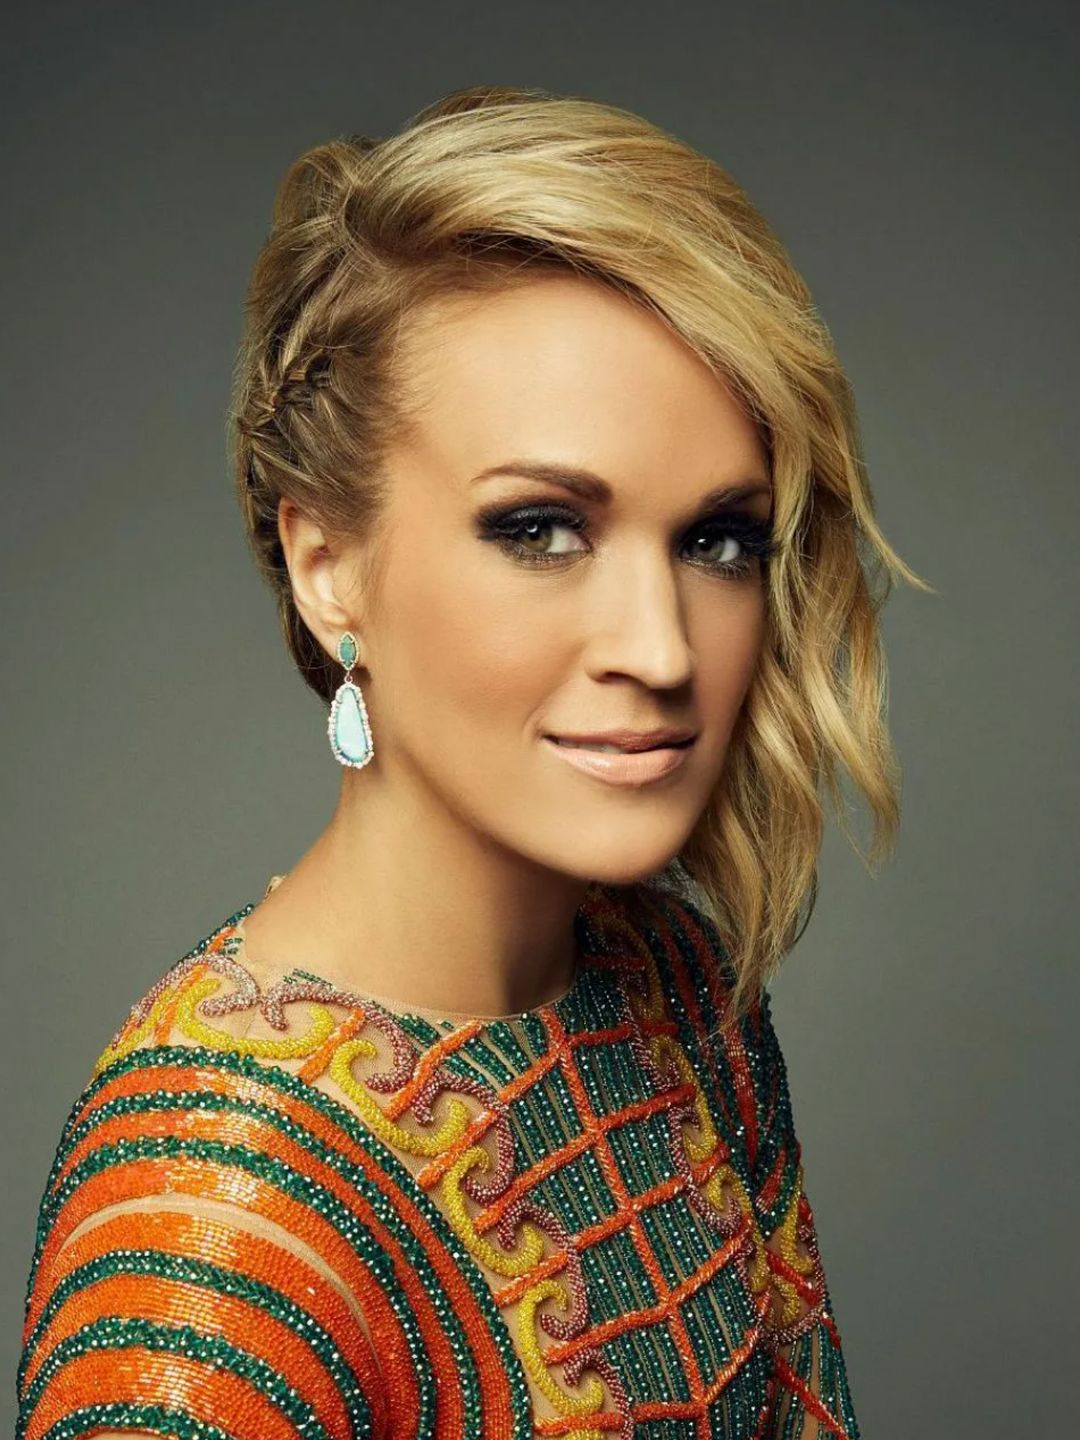 Carrie Underwood unphotoshopped pictures